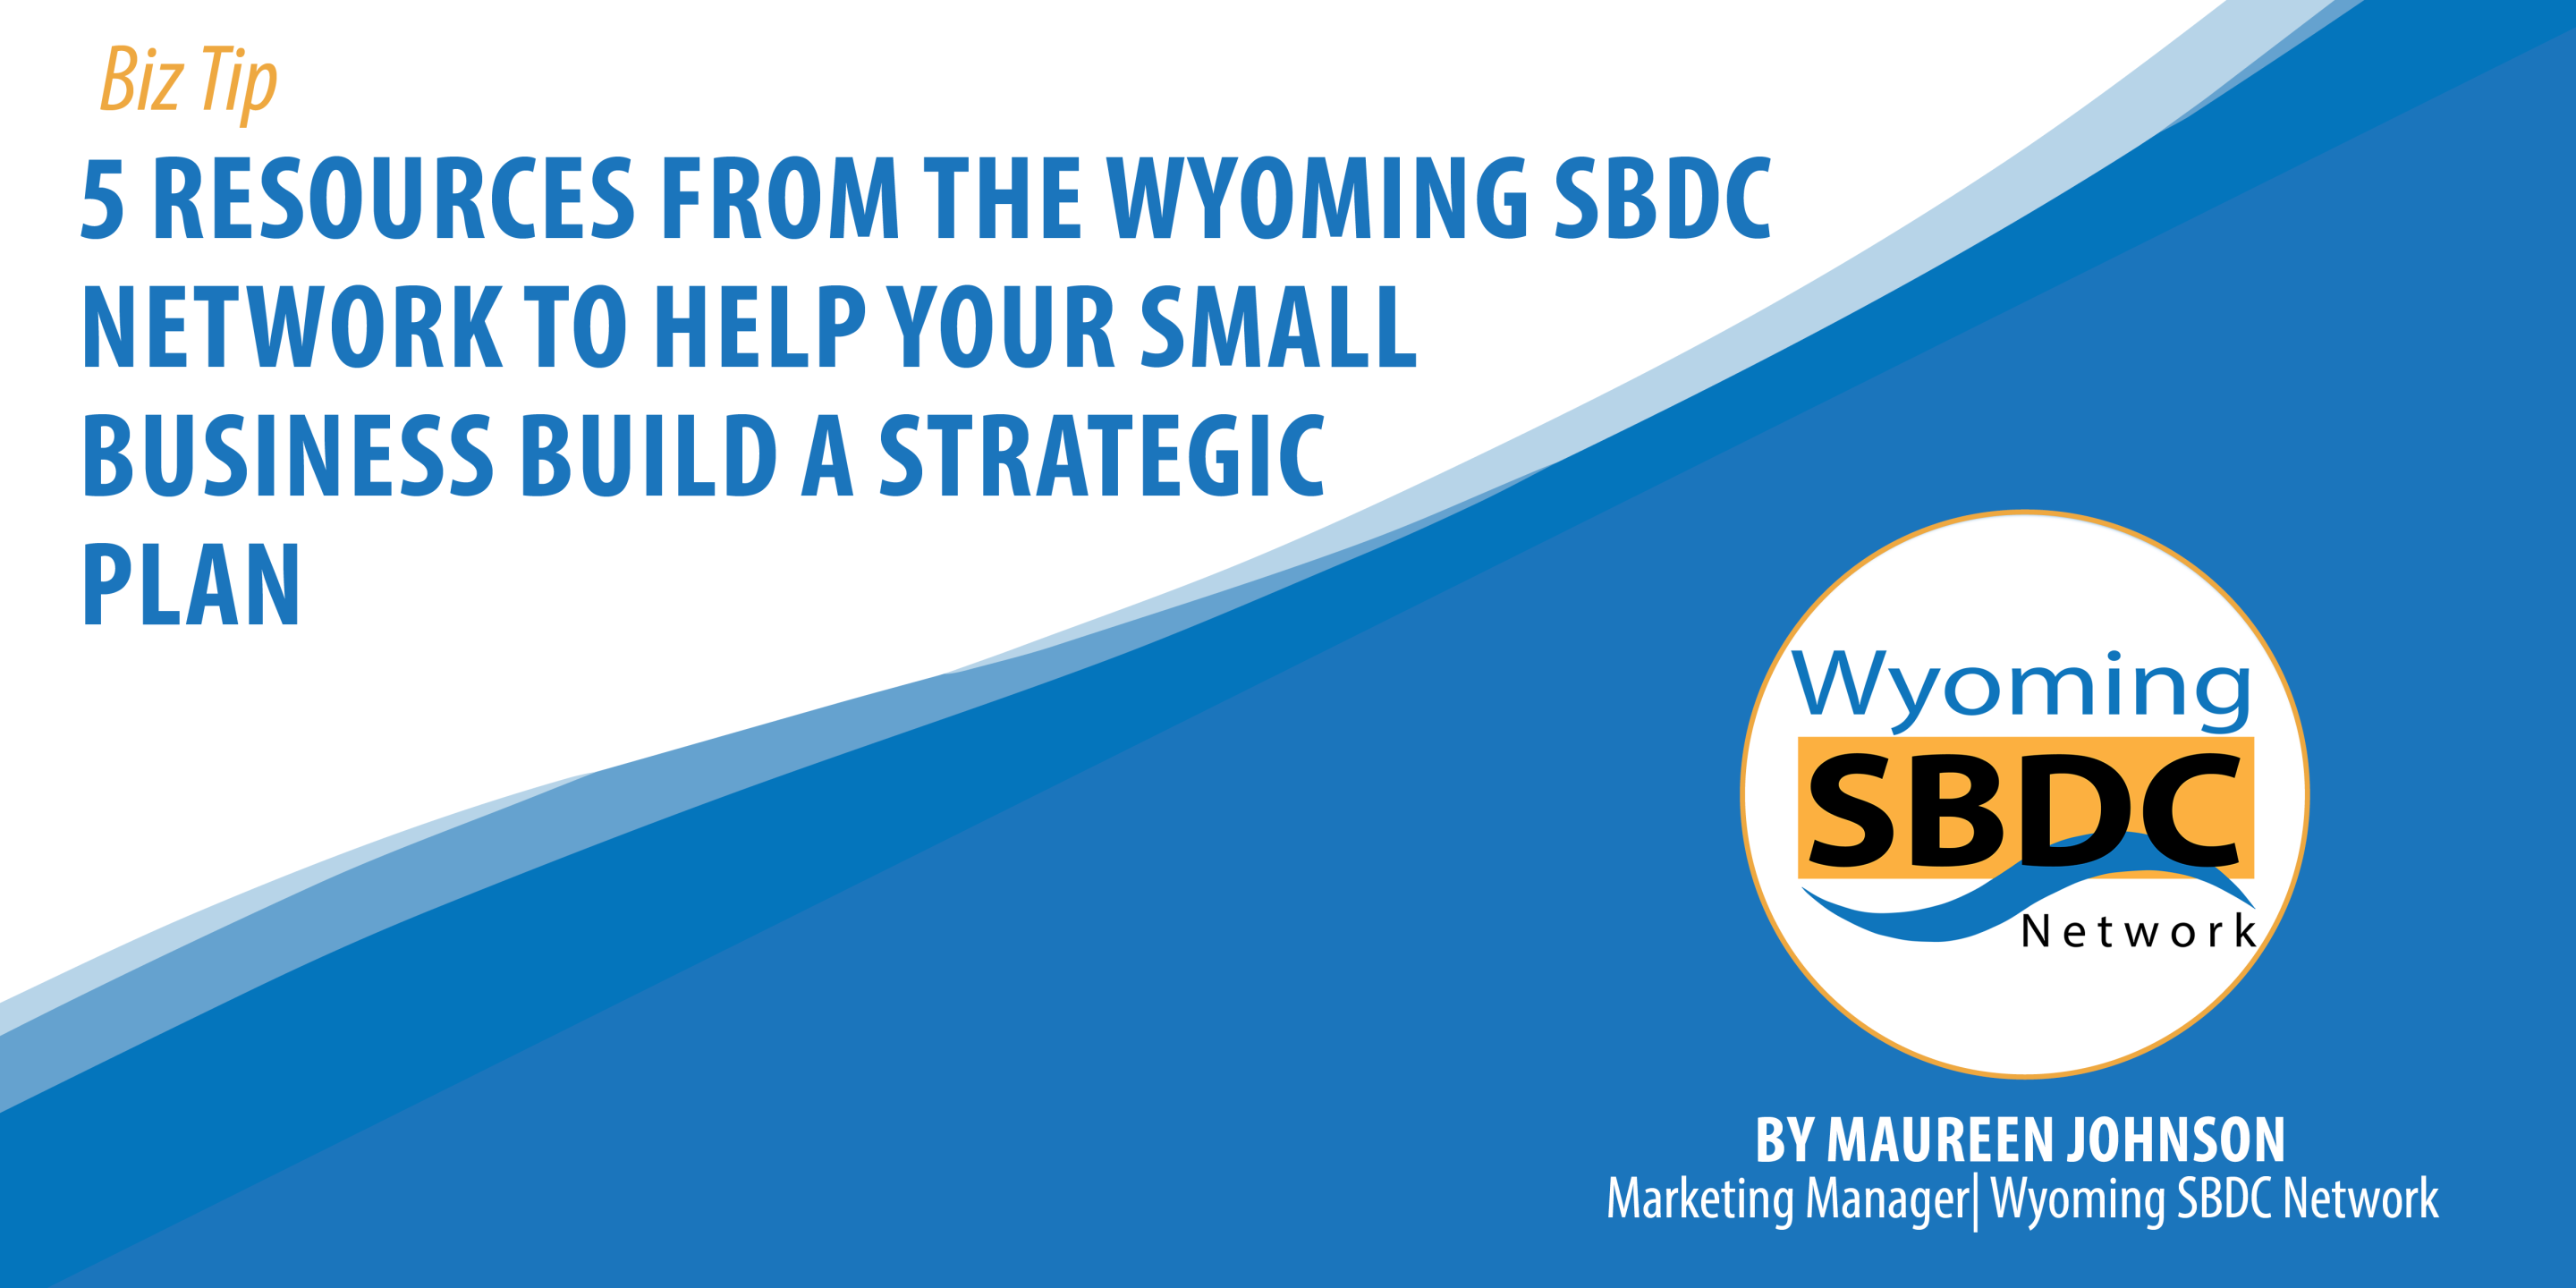 5 Resources From The Wyoming SBDC Network To Help Your Small Business Build a Strategic Plan